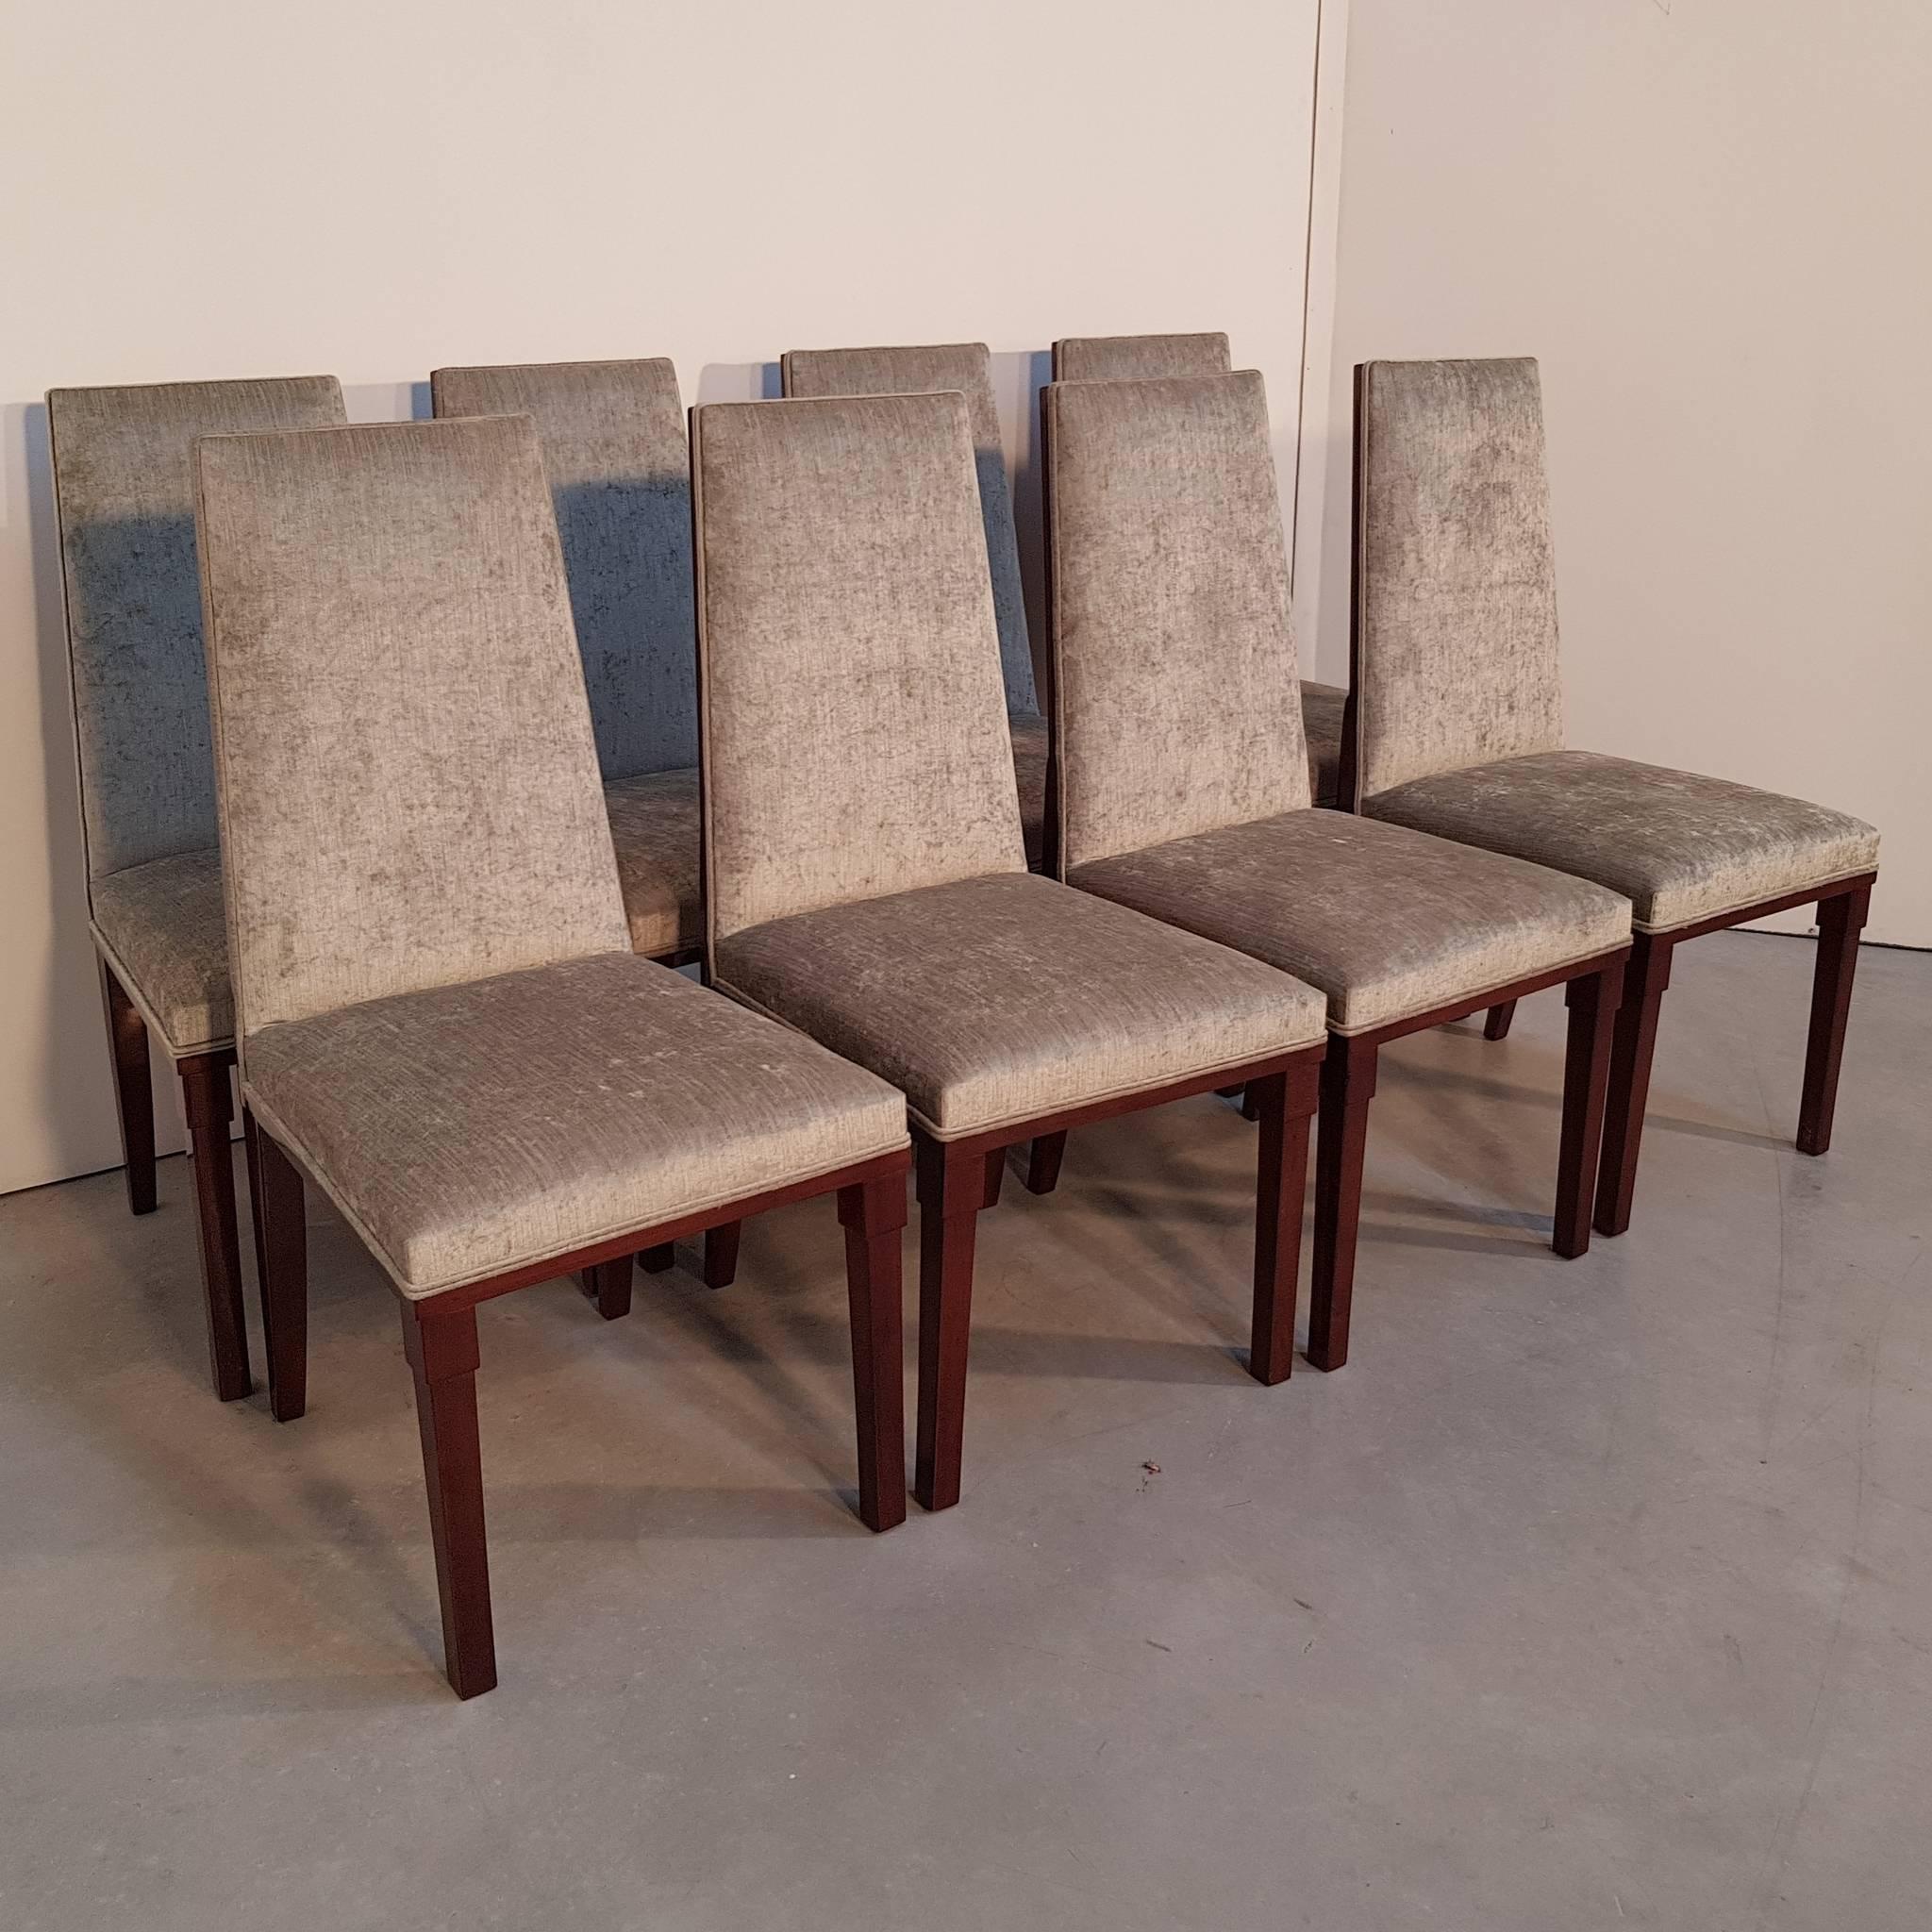 8 pieces unique chairs with newly re-upholstered surfaces, lacquered walnut veneered backside. Art Deco from France, 20th century.